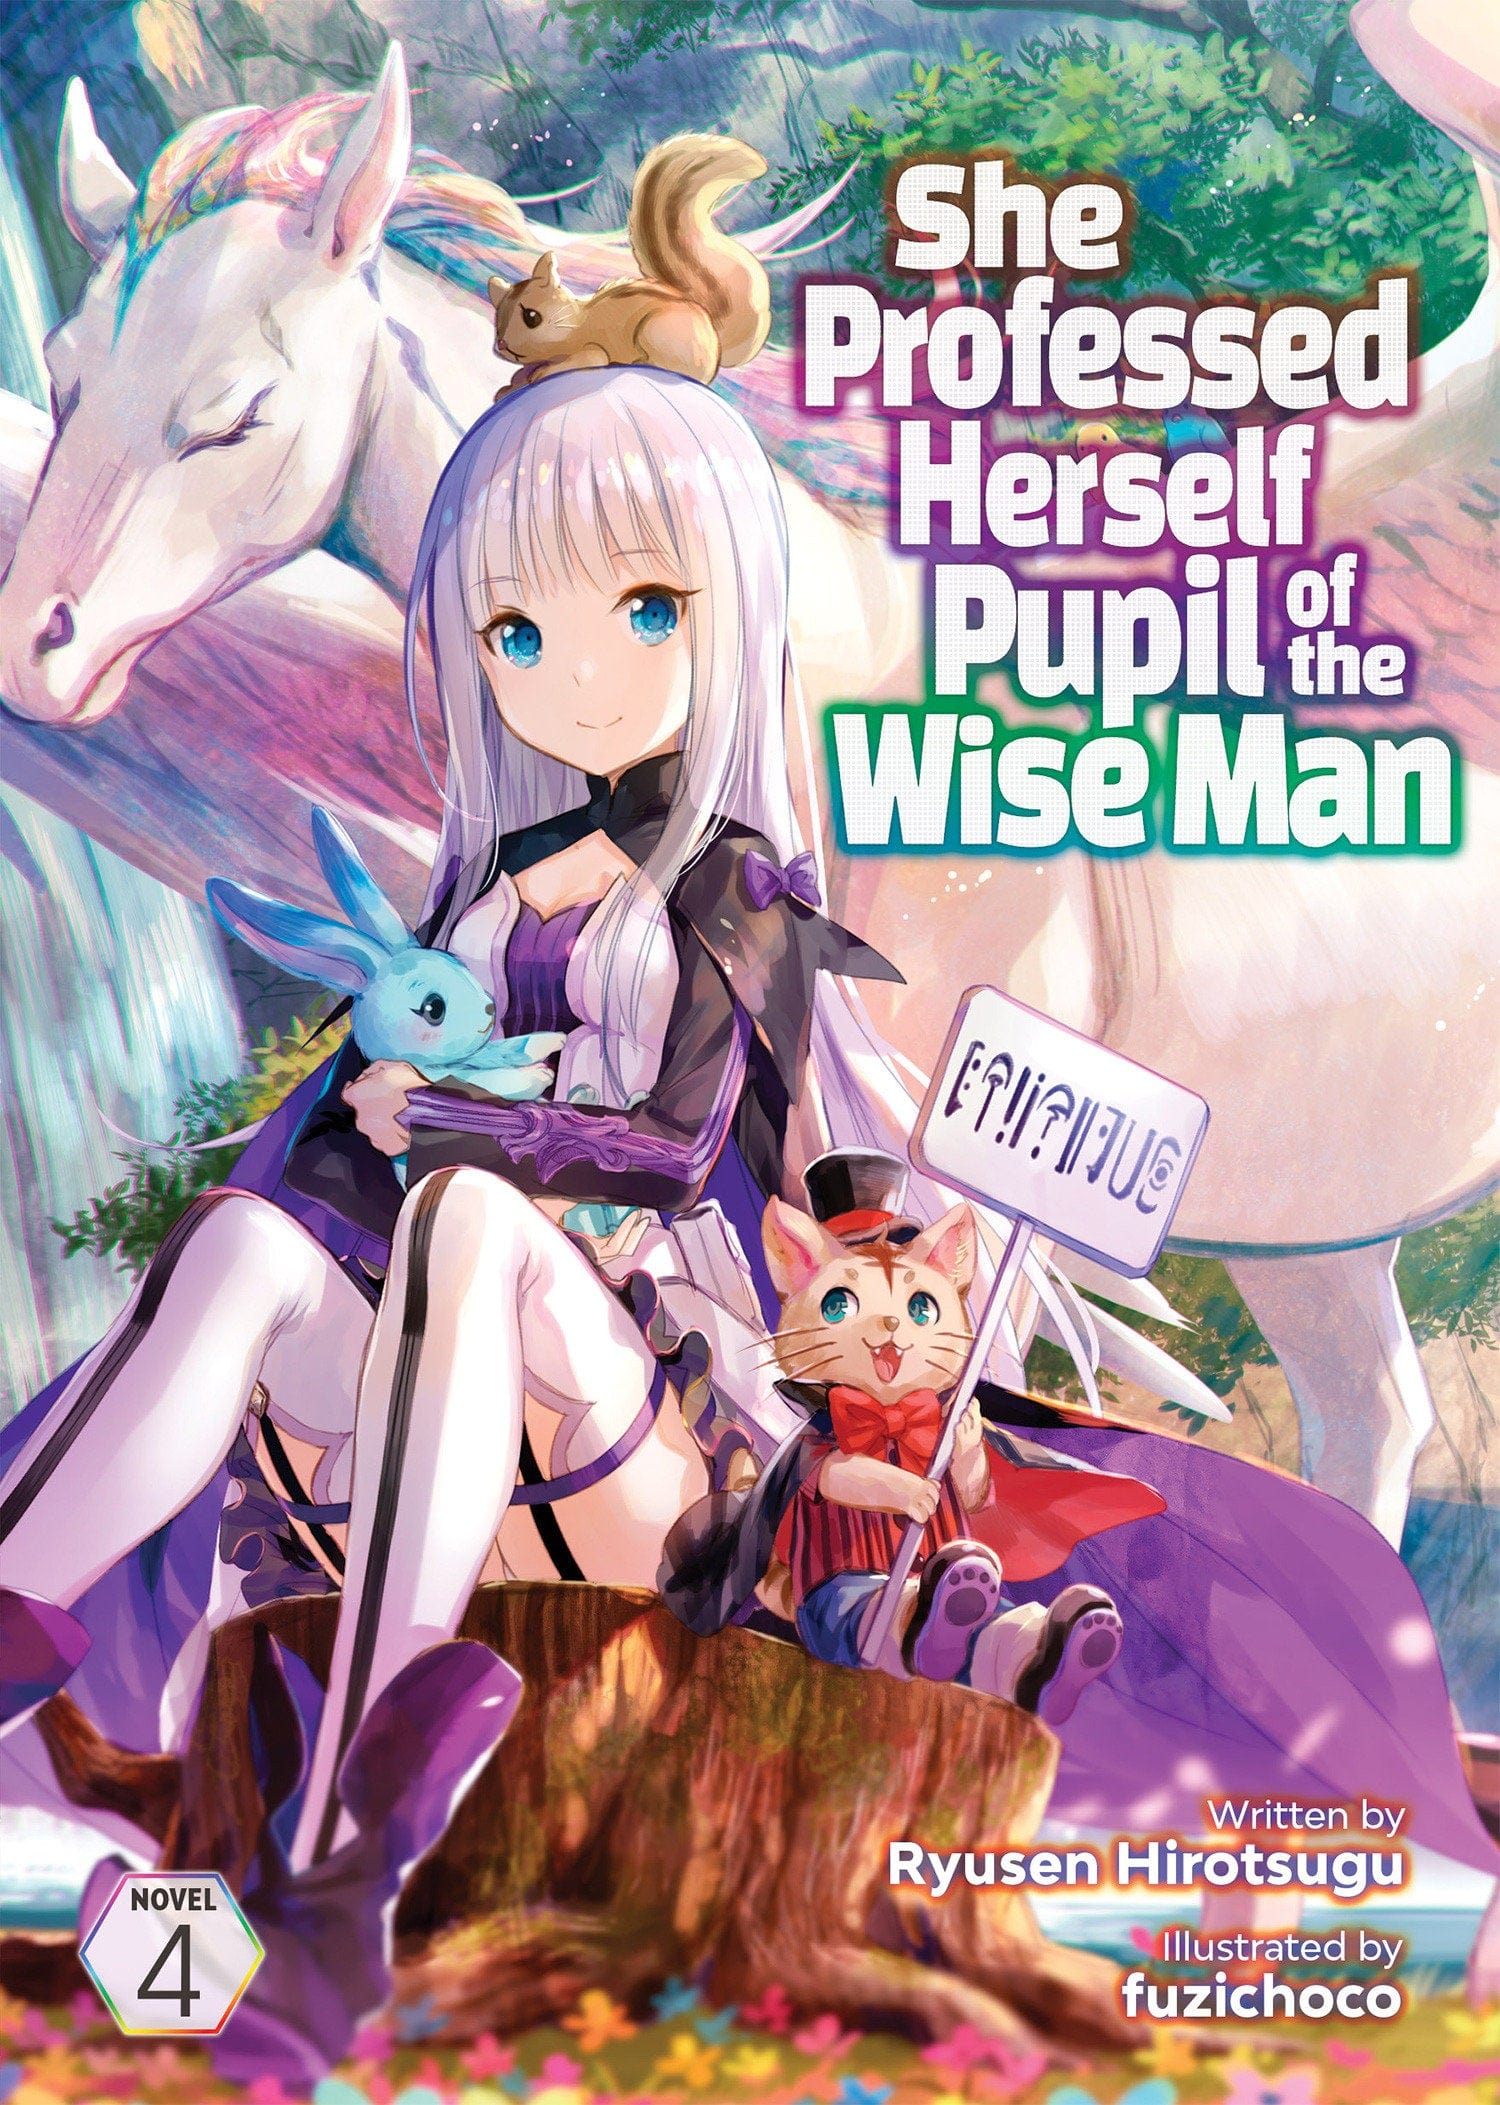 She Professed Herself Pupil Of The Wise Man (Light Novel) Vol. 4 - Third Eye